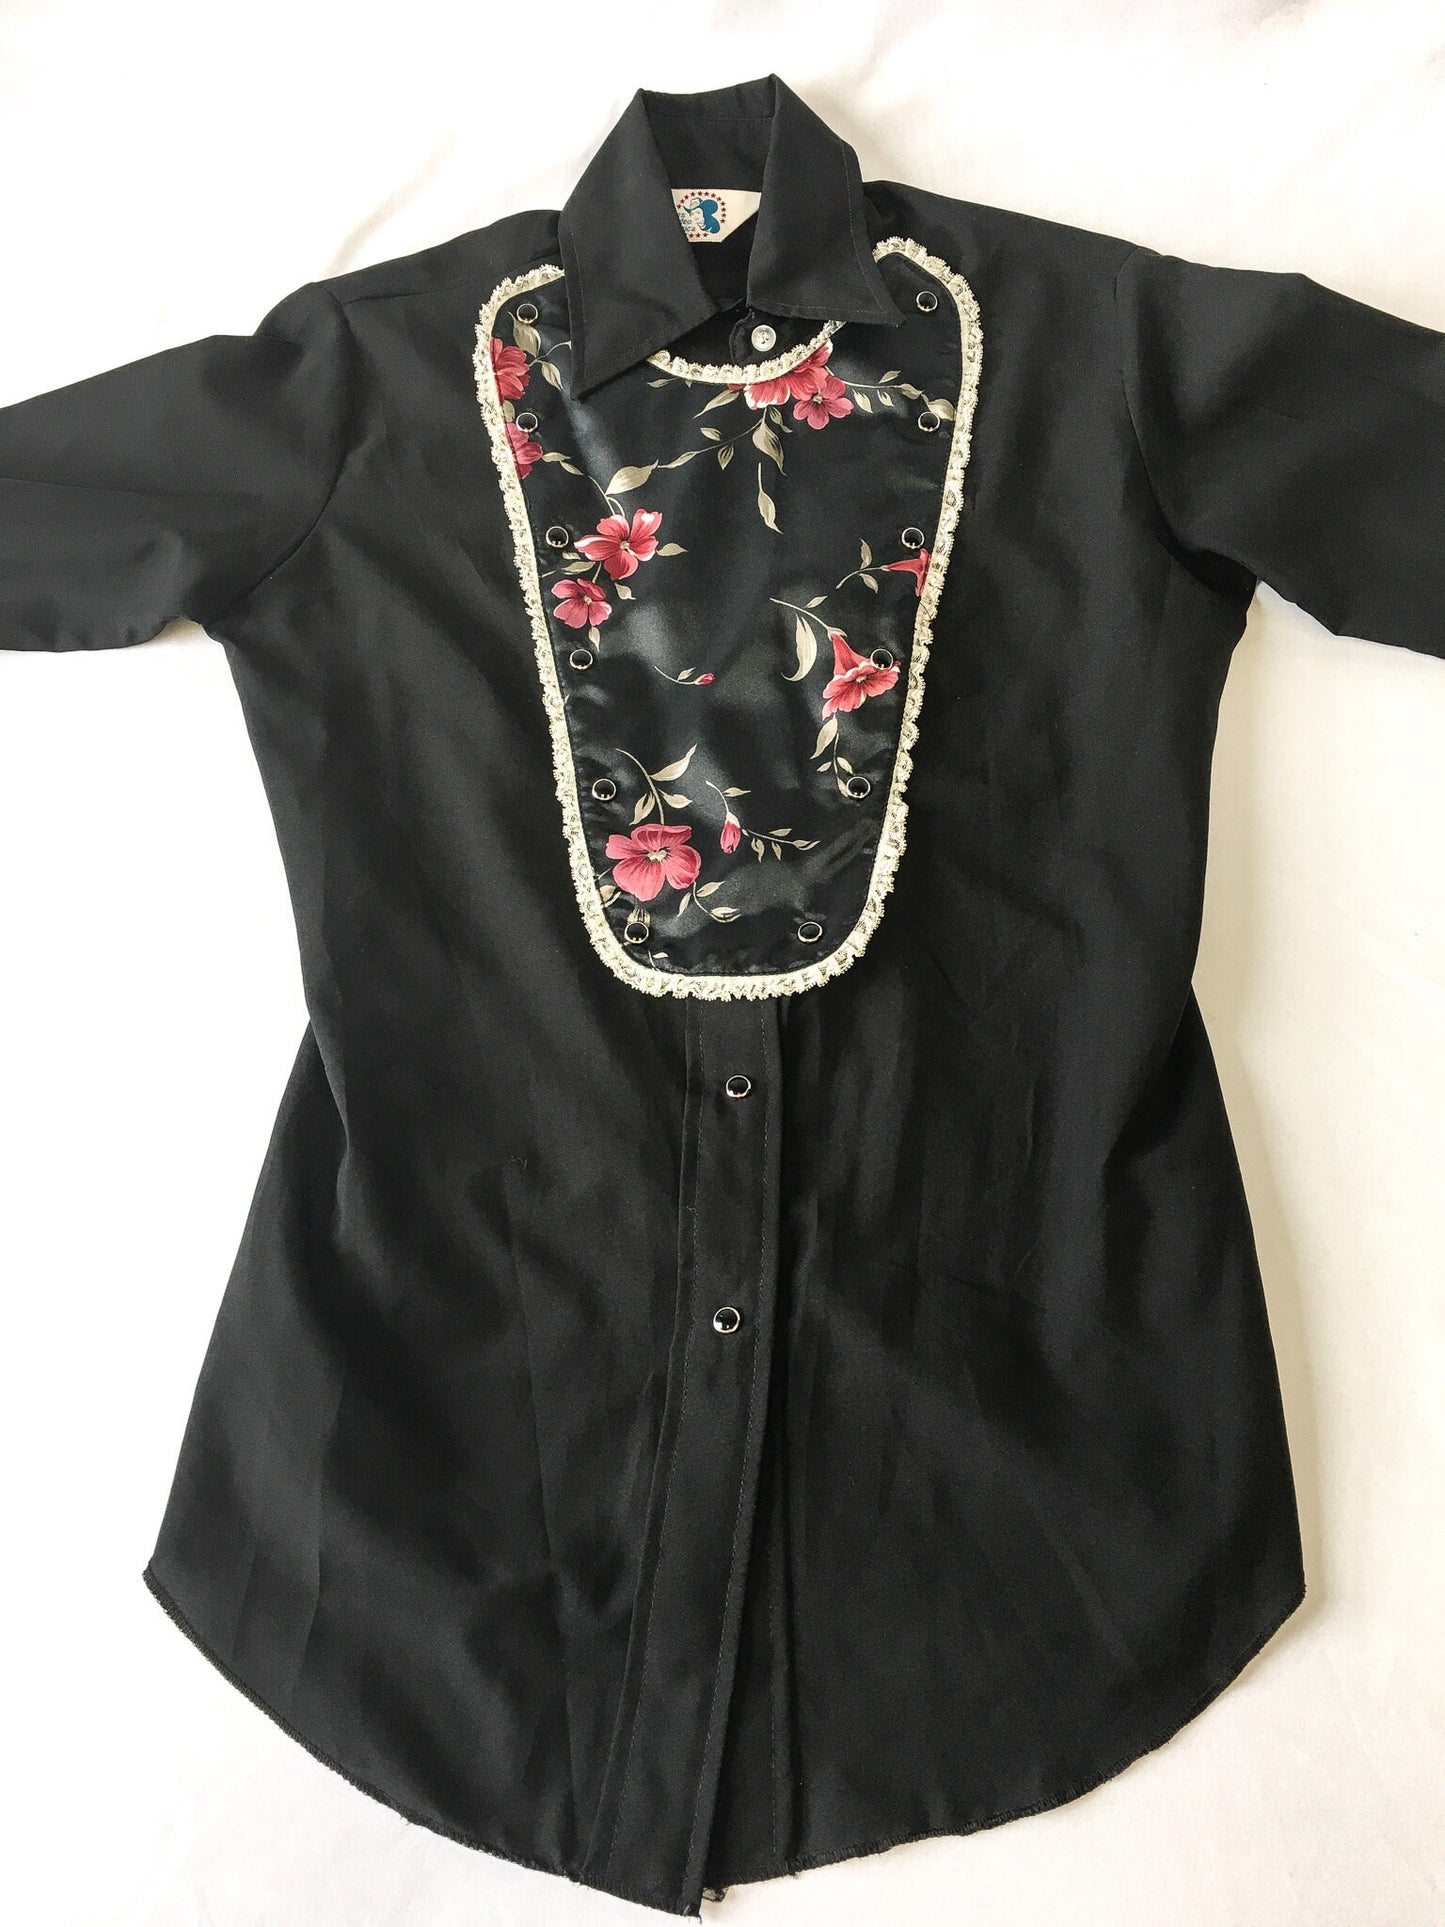 Vintage 70s Miss Rodeo America Black Floral Button Up with Detachable Chest Piece, Sz. 5/6, 70s Western Wear